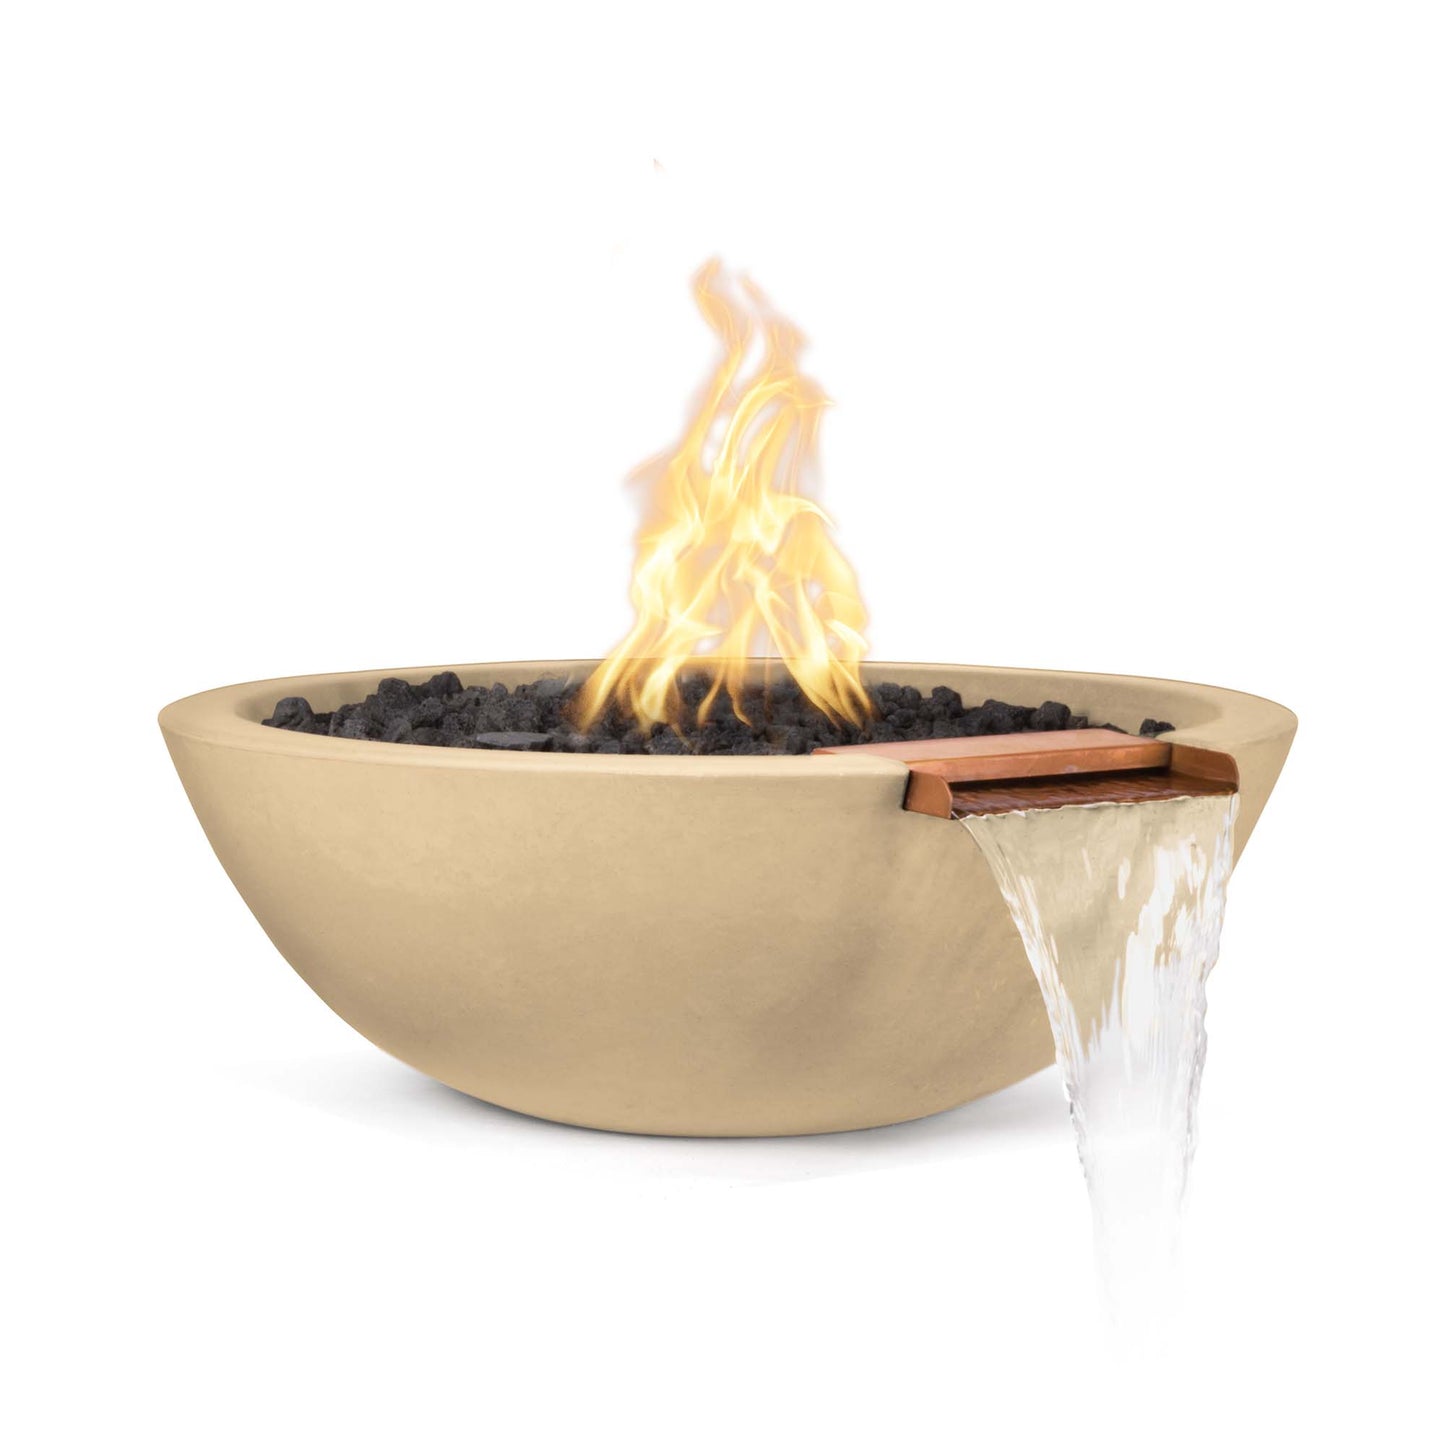 The Outdoor Plus Round Sedona 33" Metallic Silver GFRC Concrete Liquid Propane Fire & Water Bowl with Match Lit with Flame Sense Ignition